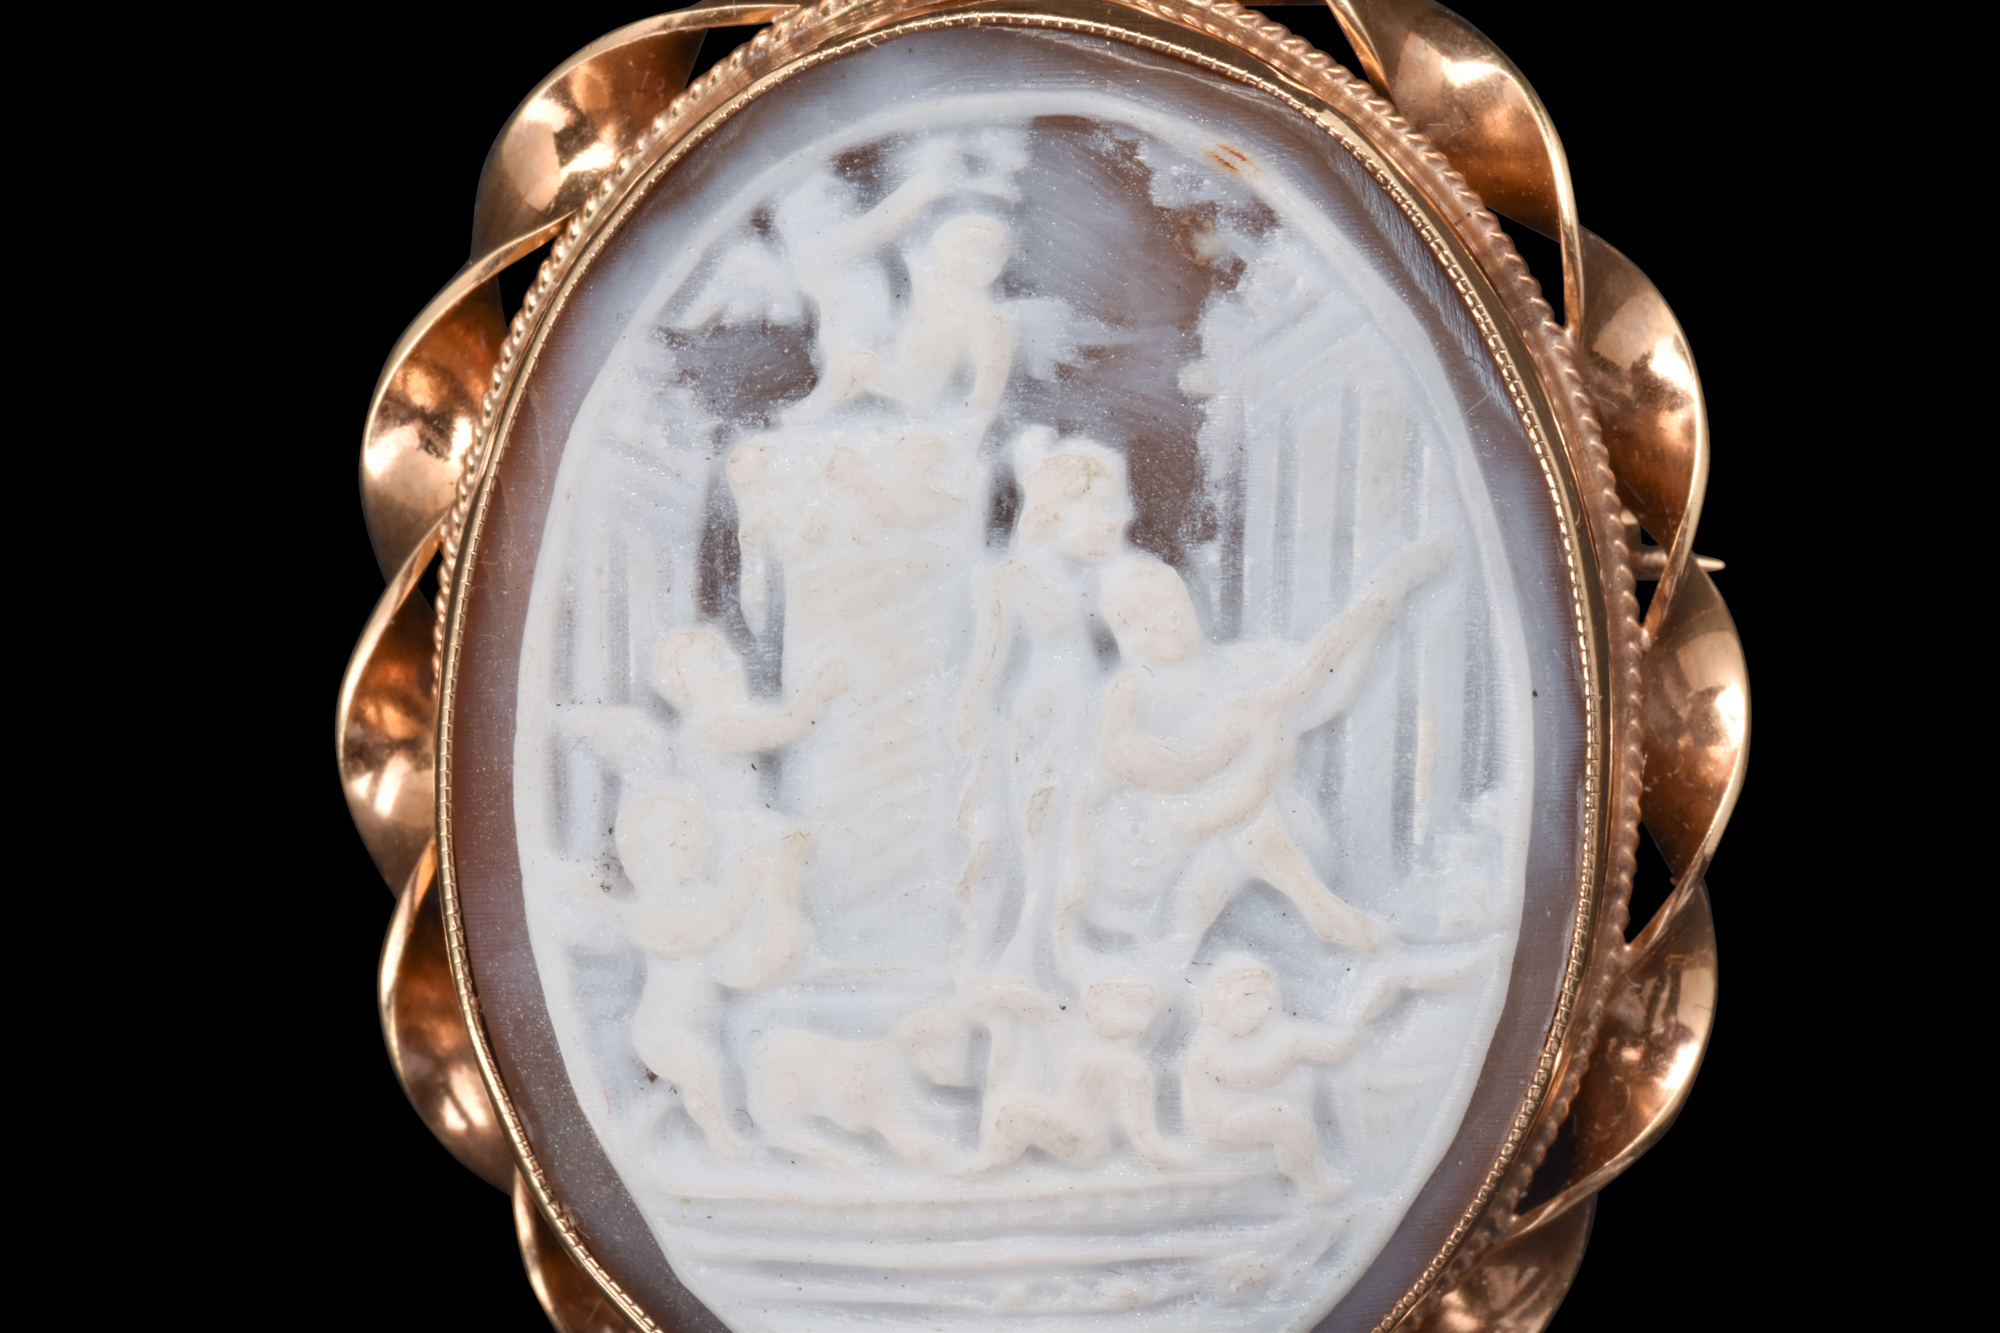 NEOCLASSICAL GOLD BROOCH WITH ROMAN SCENE CAMEO - Image 3 of 3